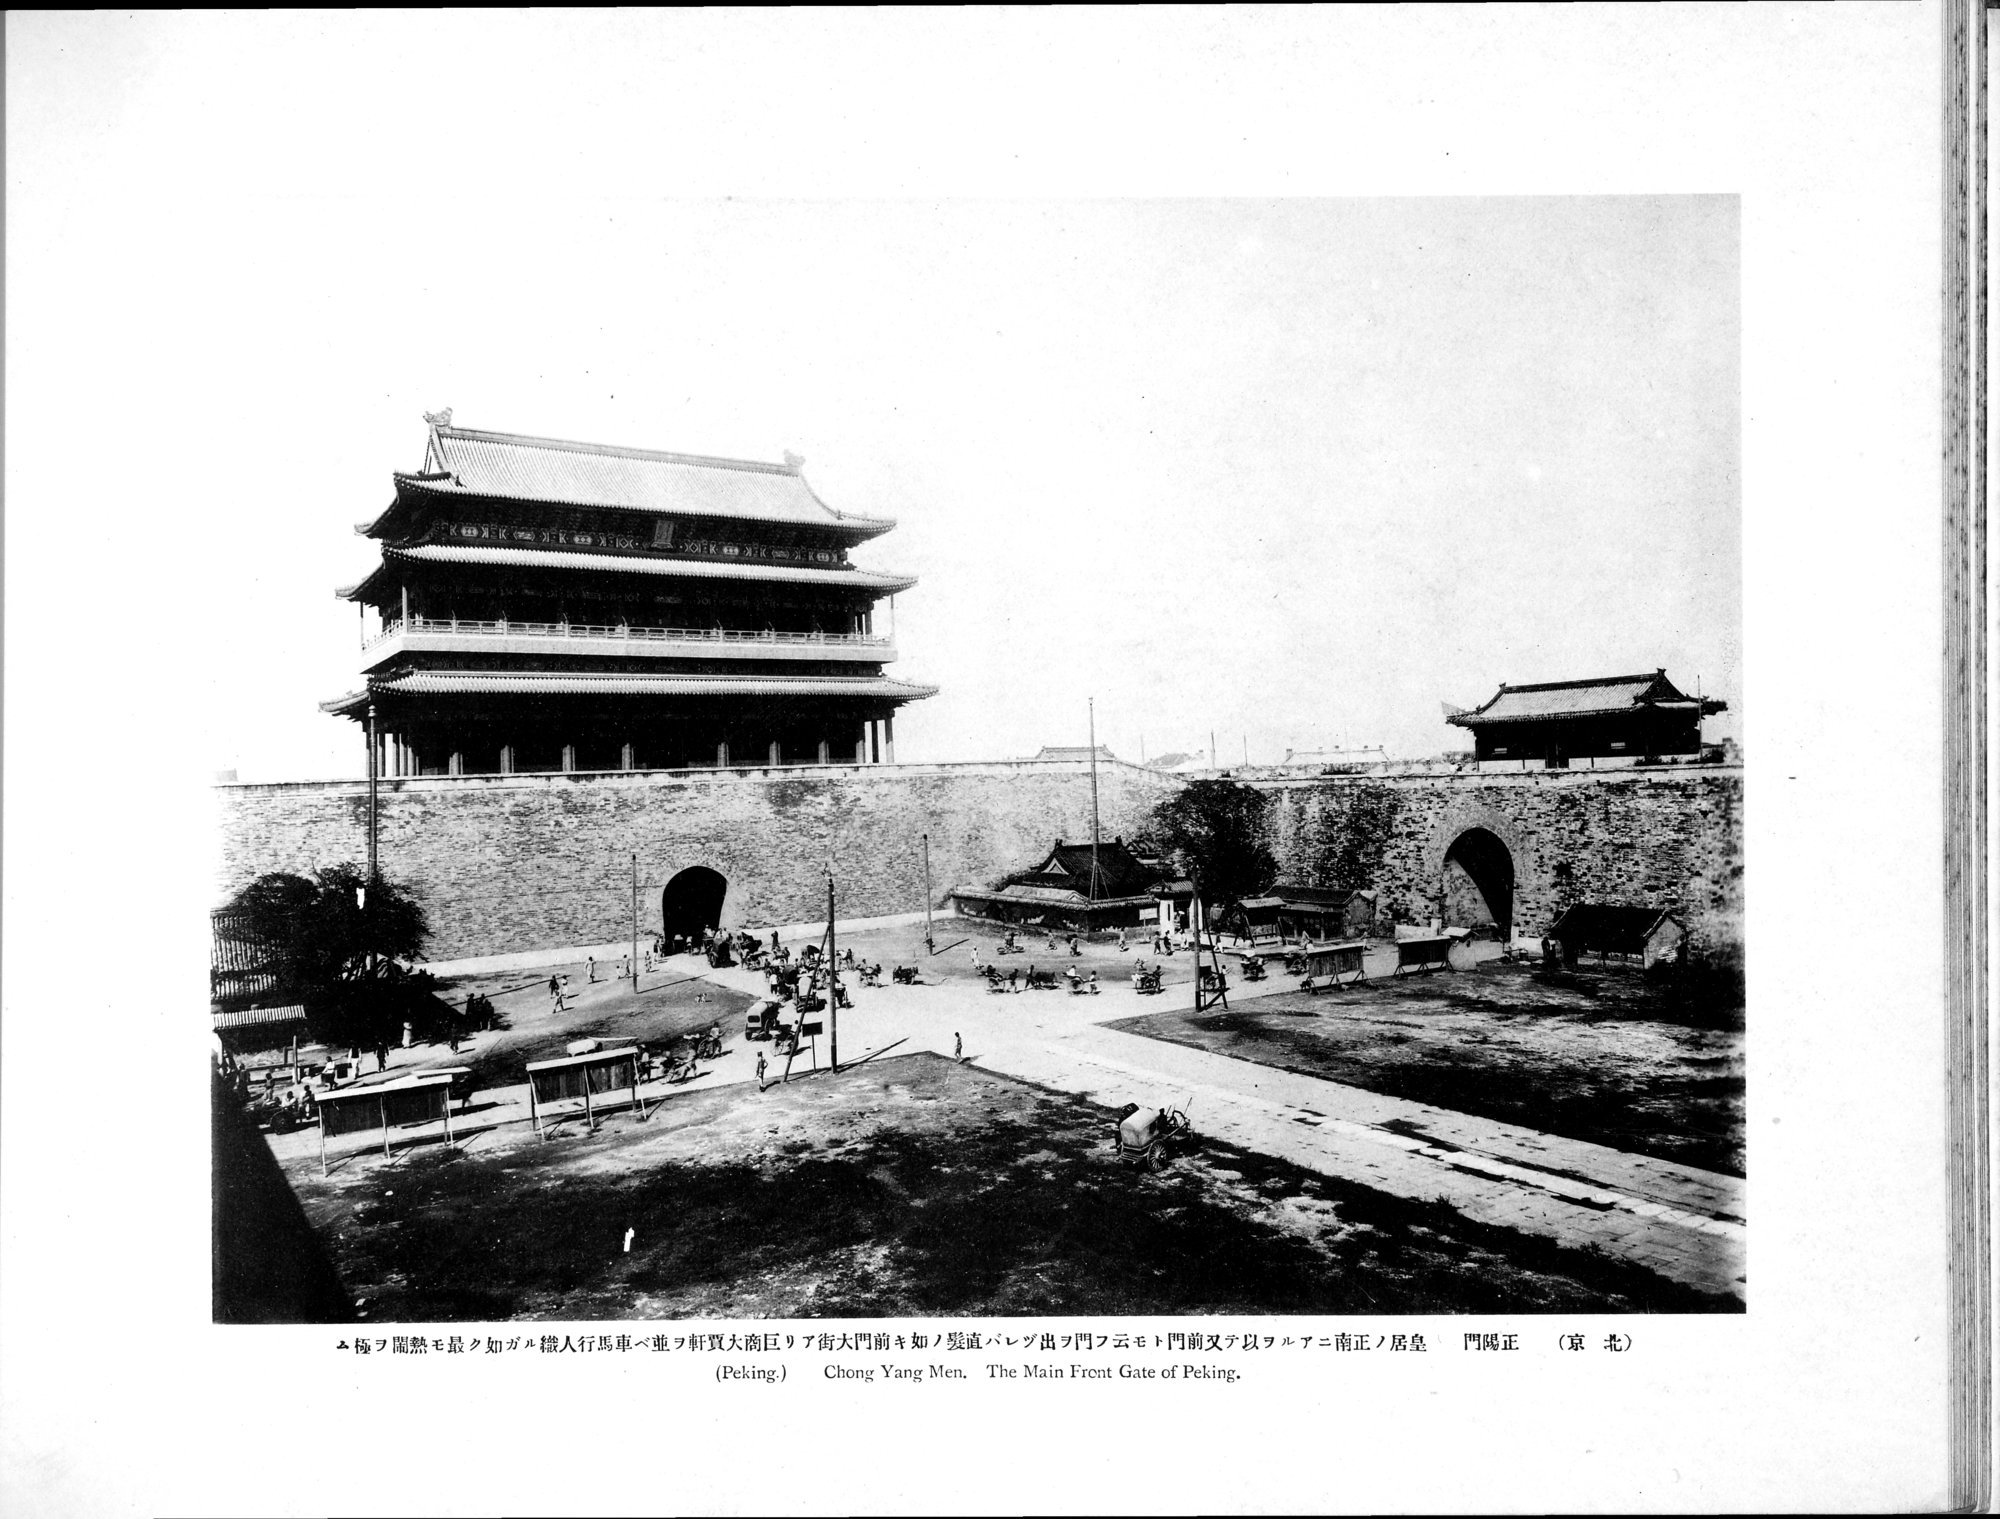 Views and Custom of North China : vol.1 / Page 141 (Grayscale High Resolution Image)